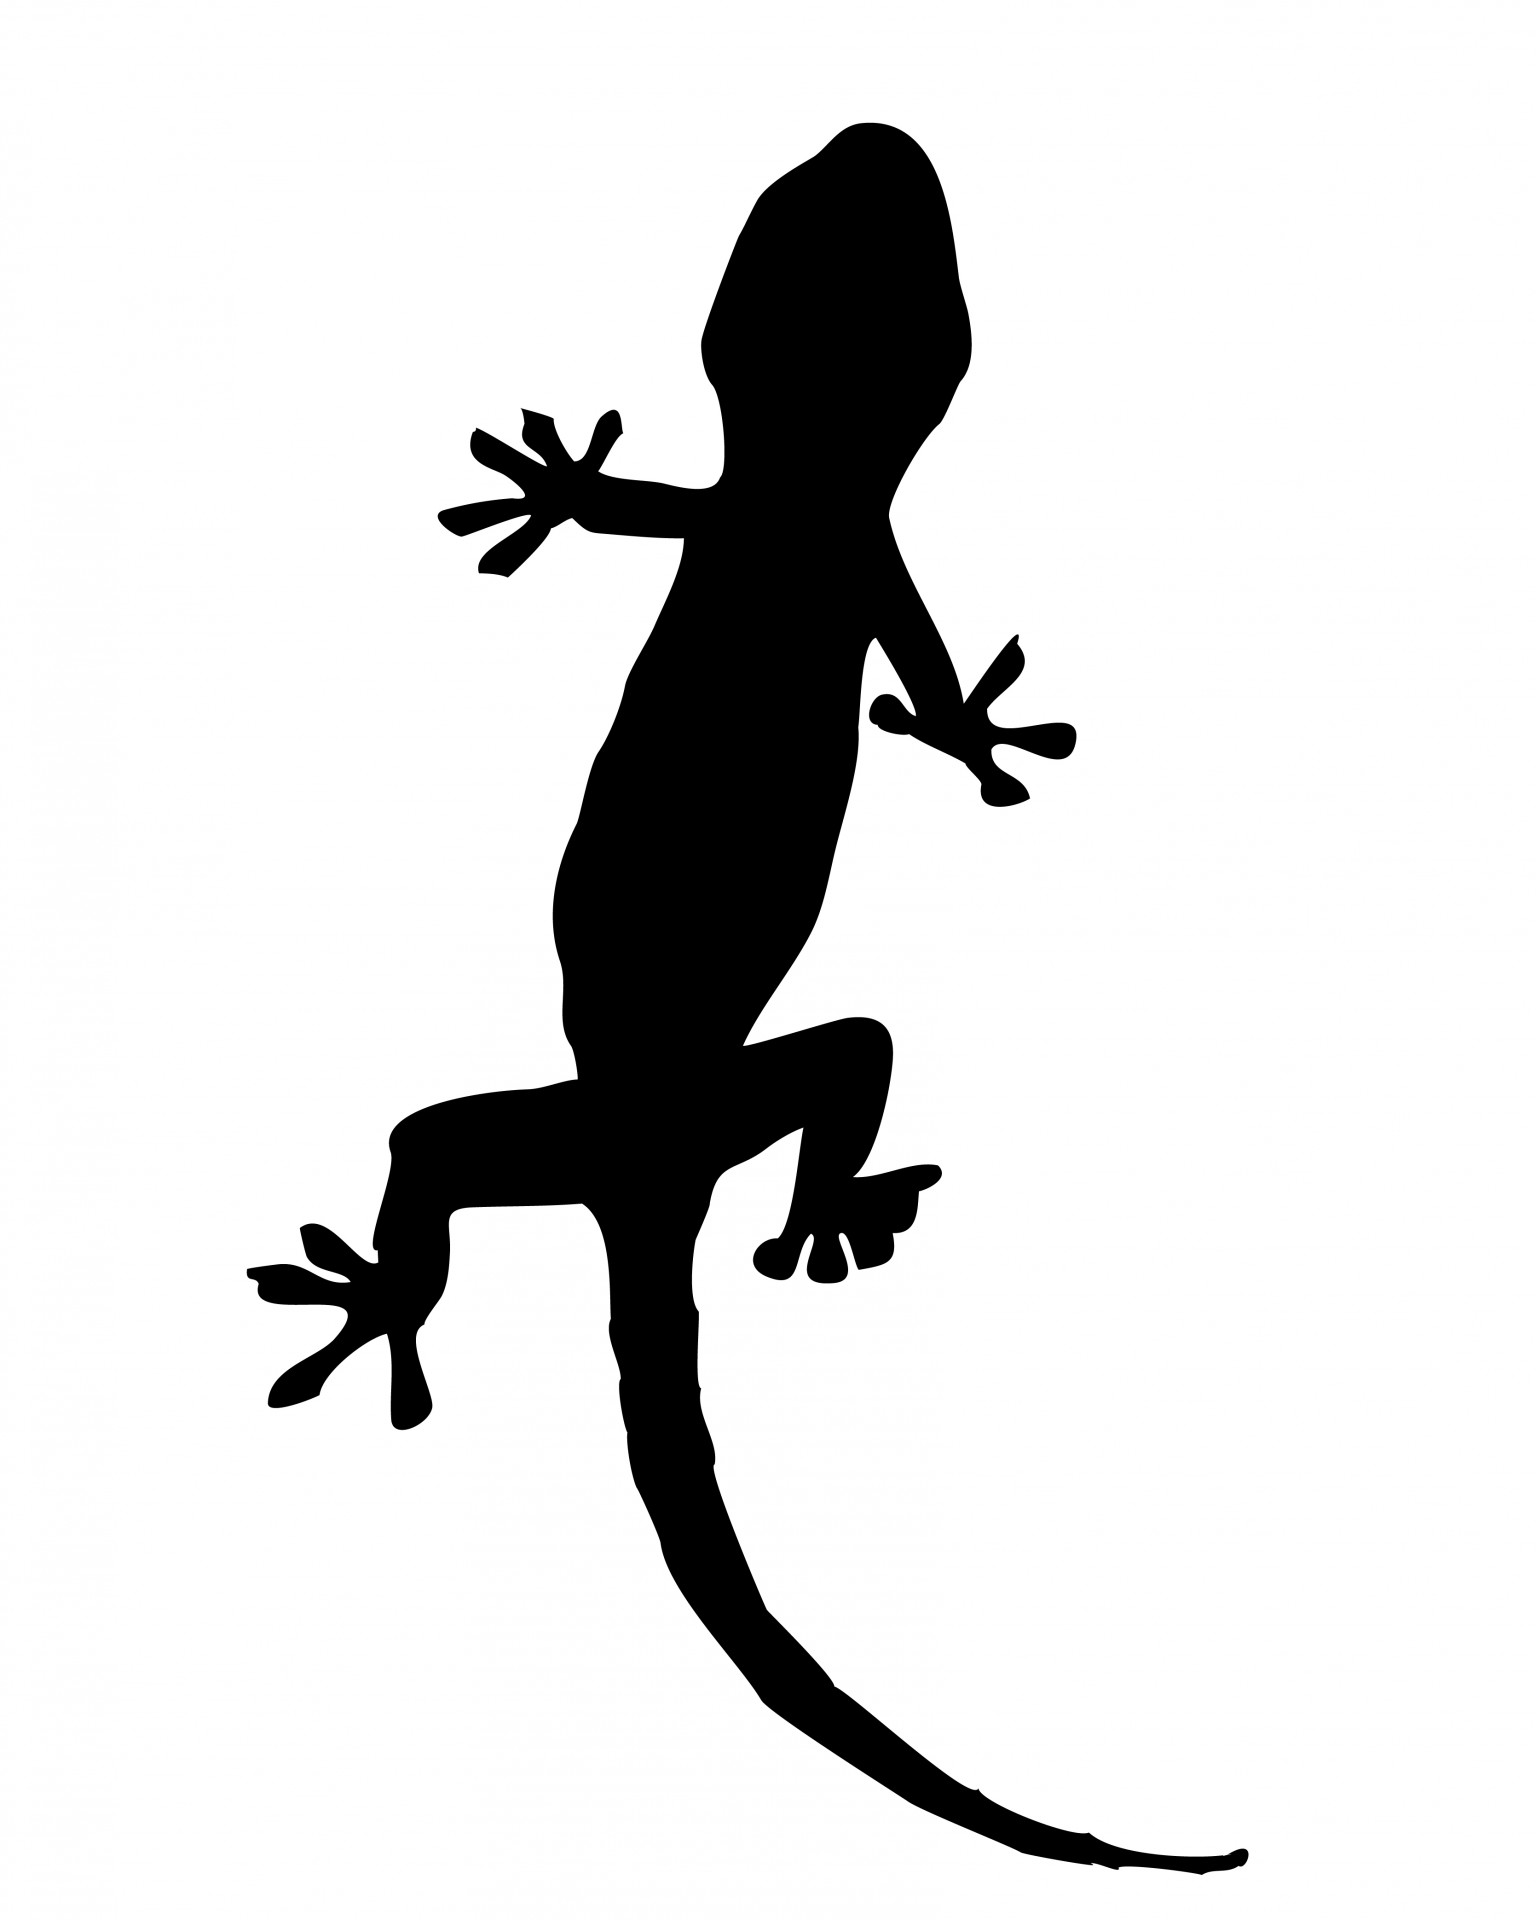 Gecko Silhouette Clipart Free Stock Photo - Public Domain Pictures